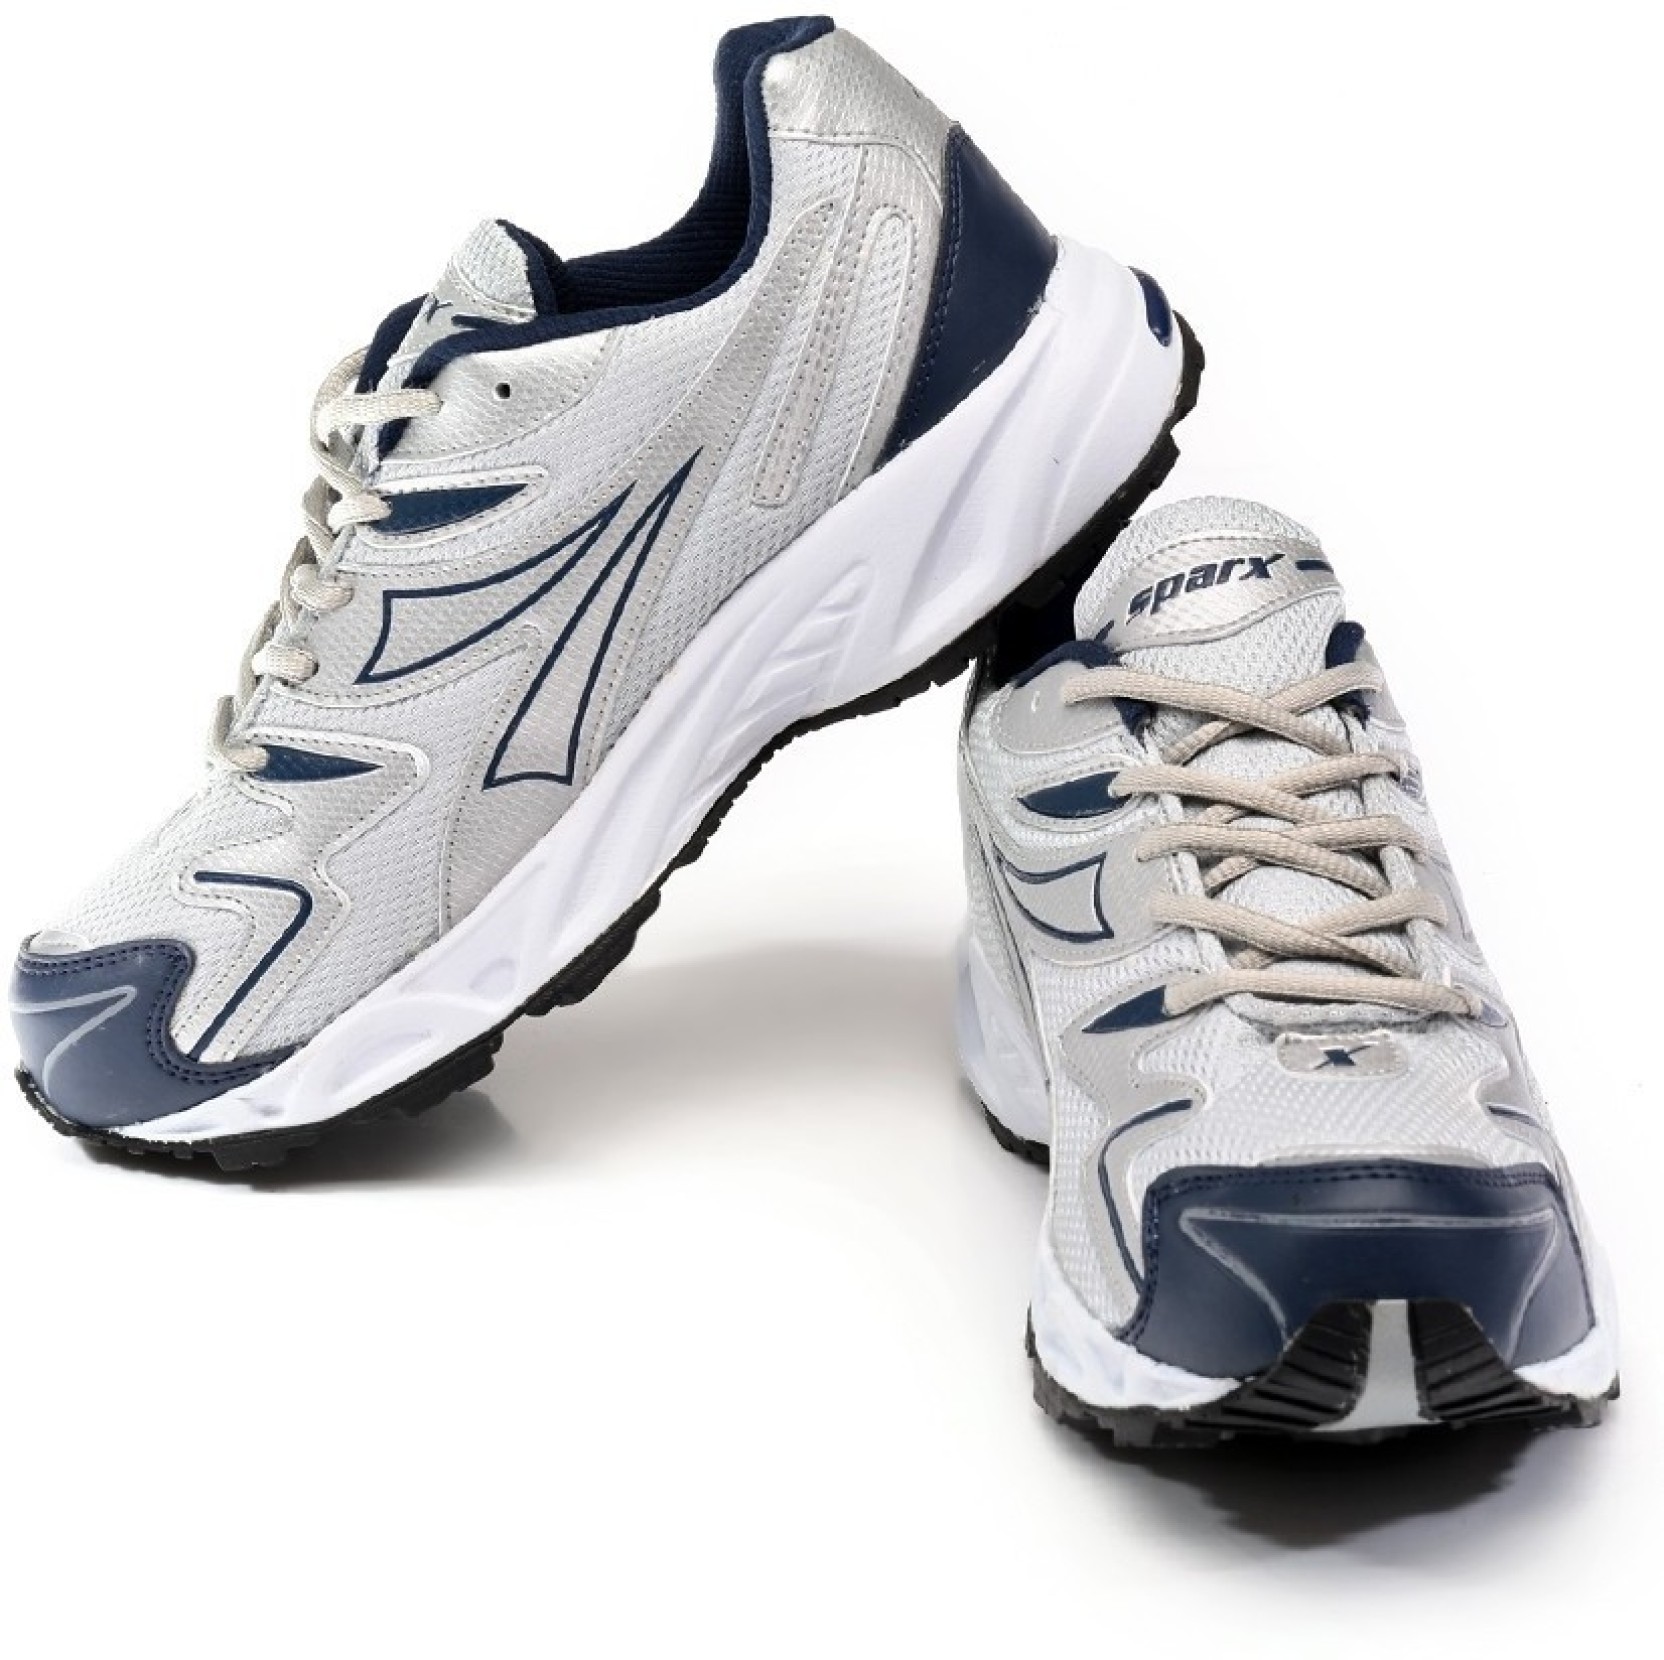 Sparx Running Shoes - Buy Navy, Silver Color Sparx Running Shoes Online ...